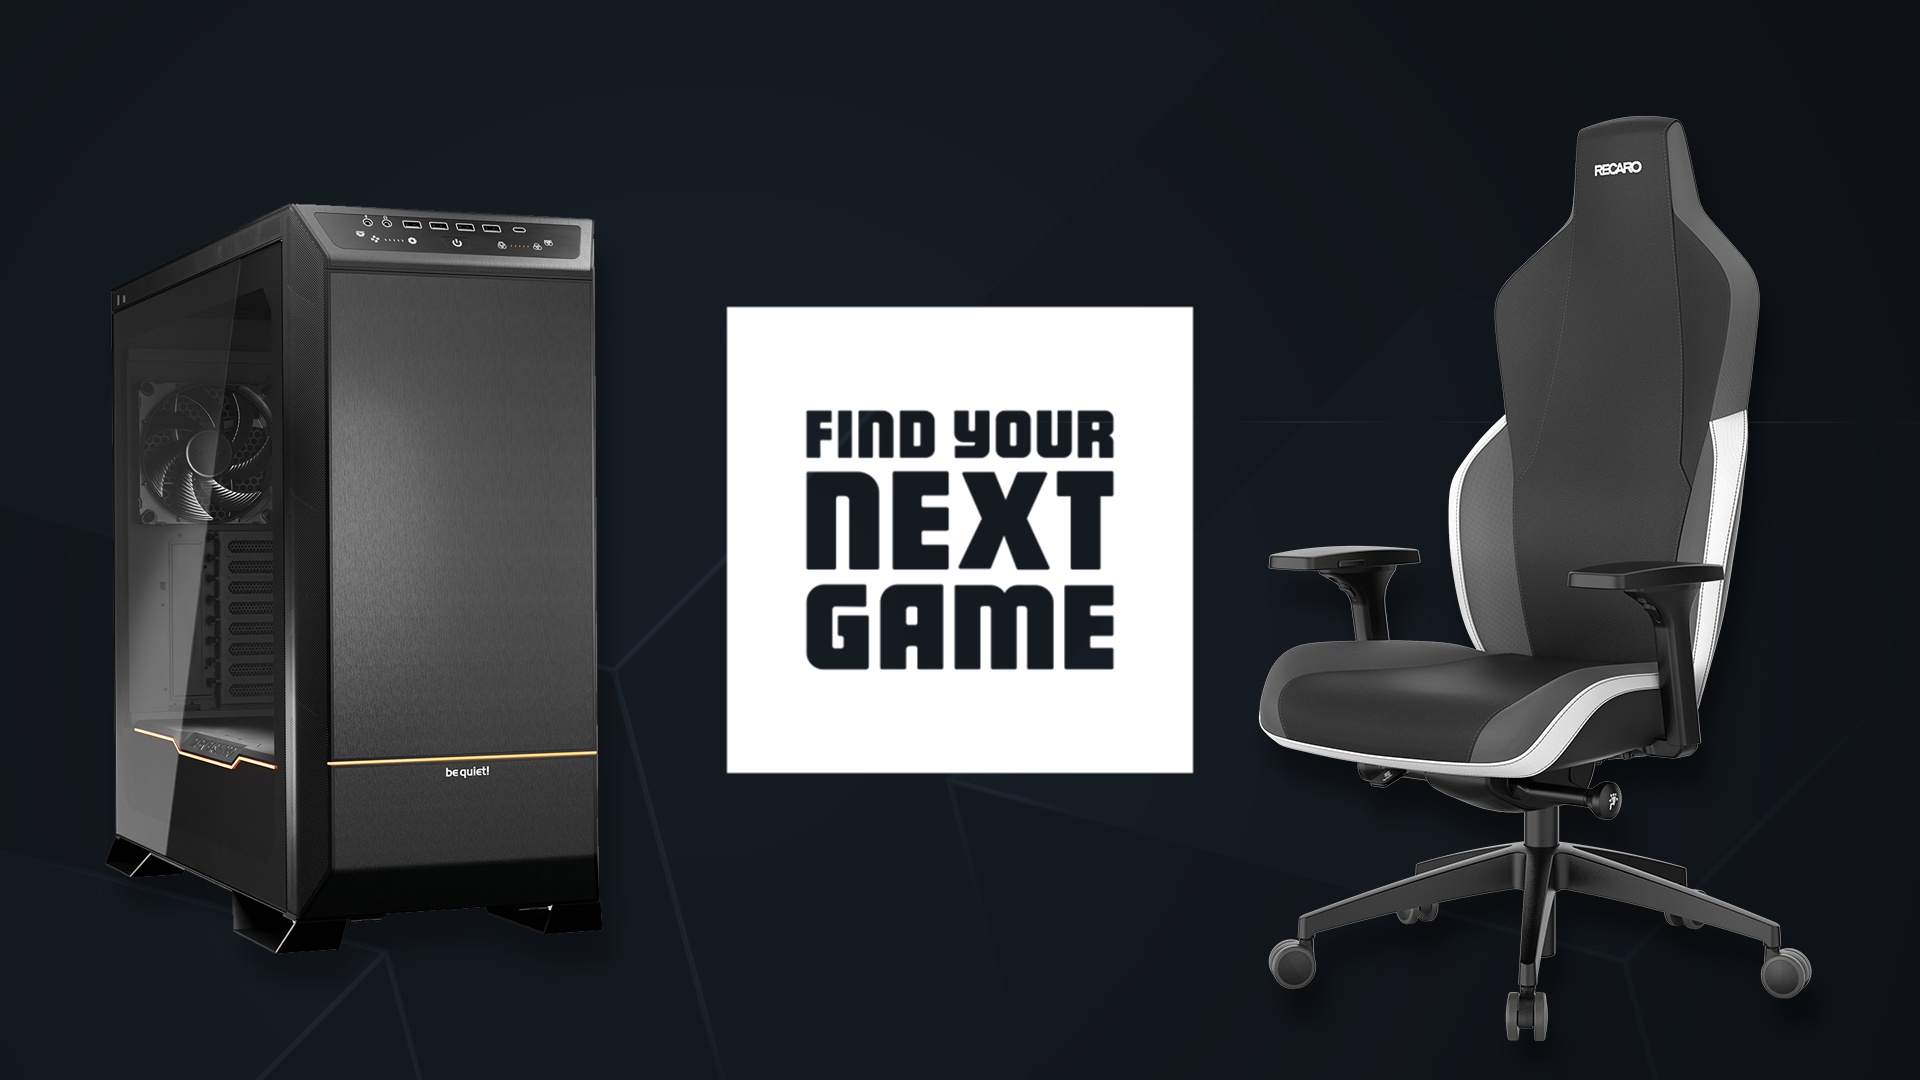 gamescom – Win a RECARO gaming chair and a Dark Base Pro 901 bag from BeQuiet